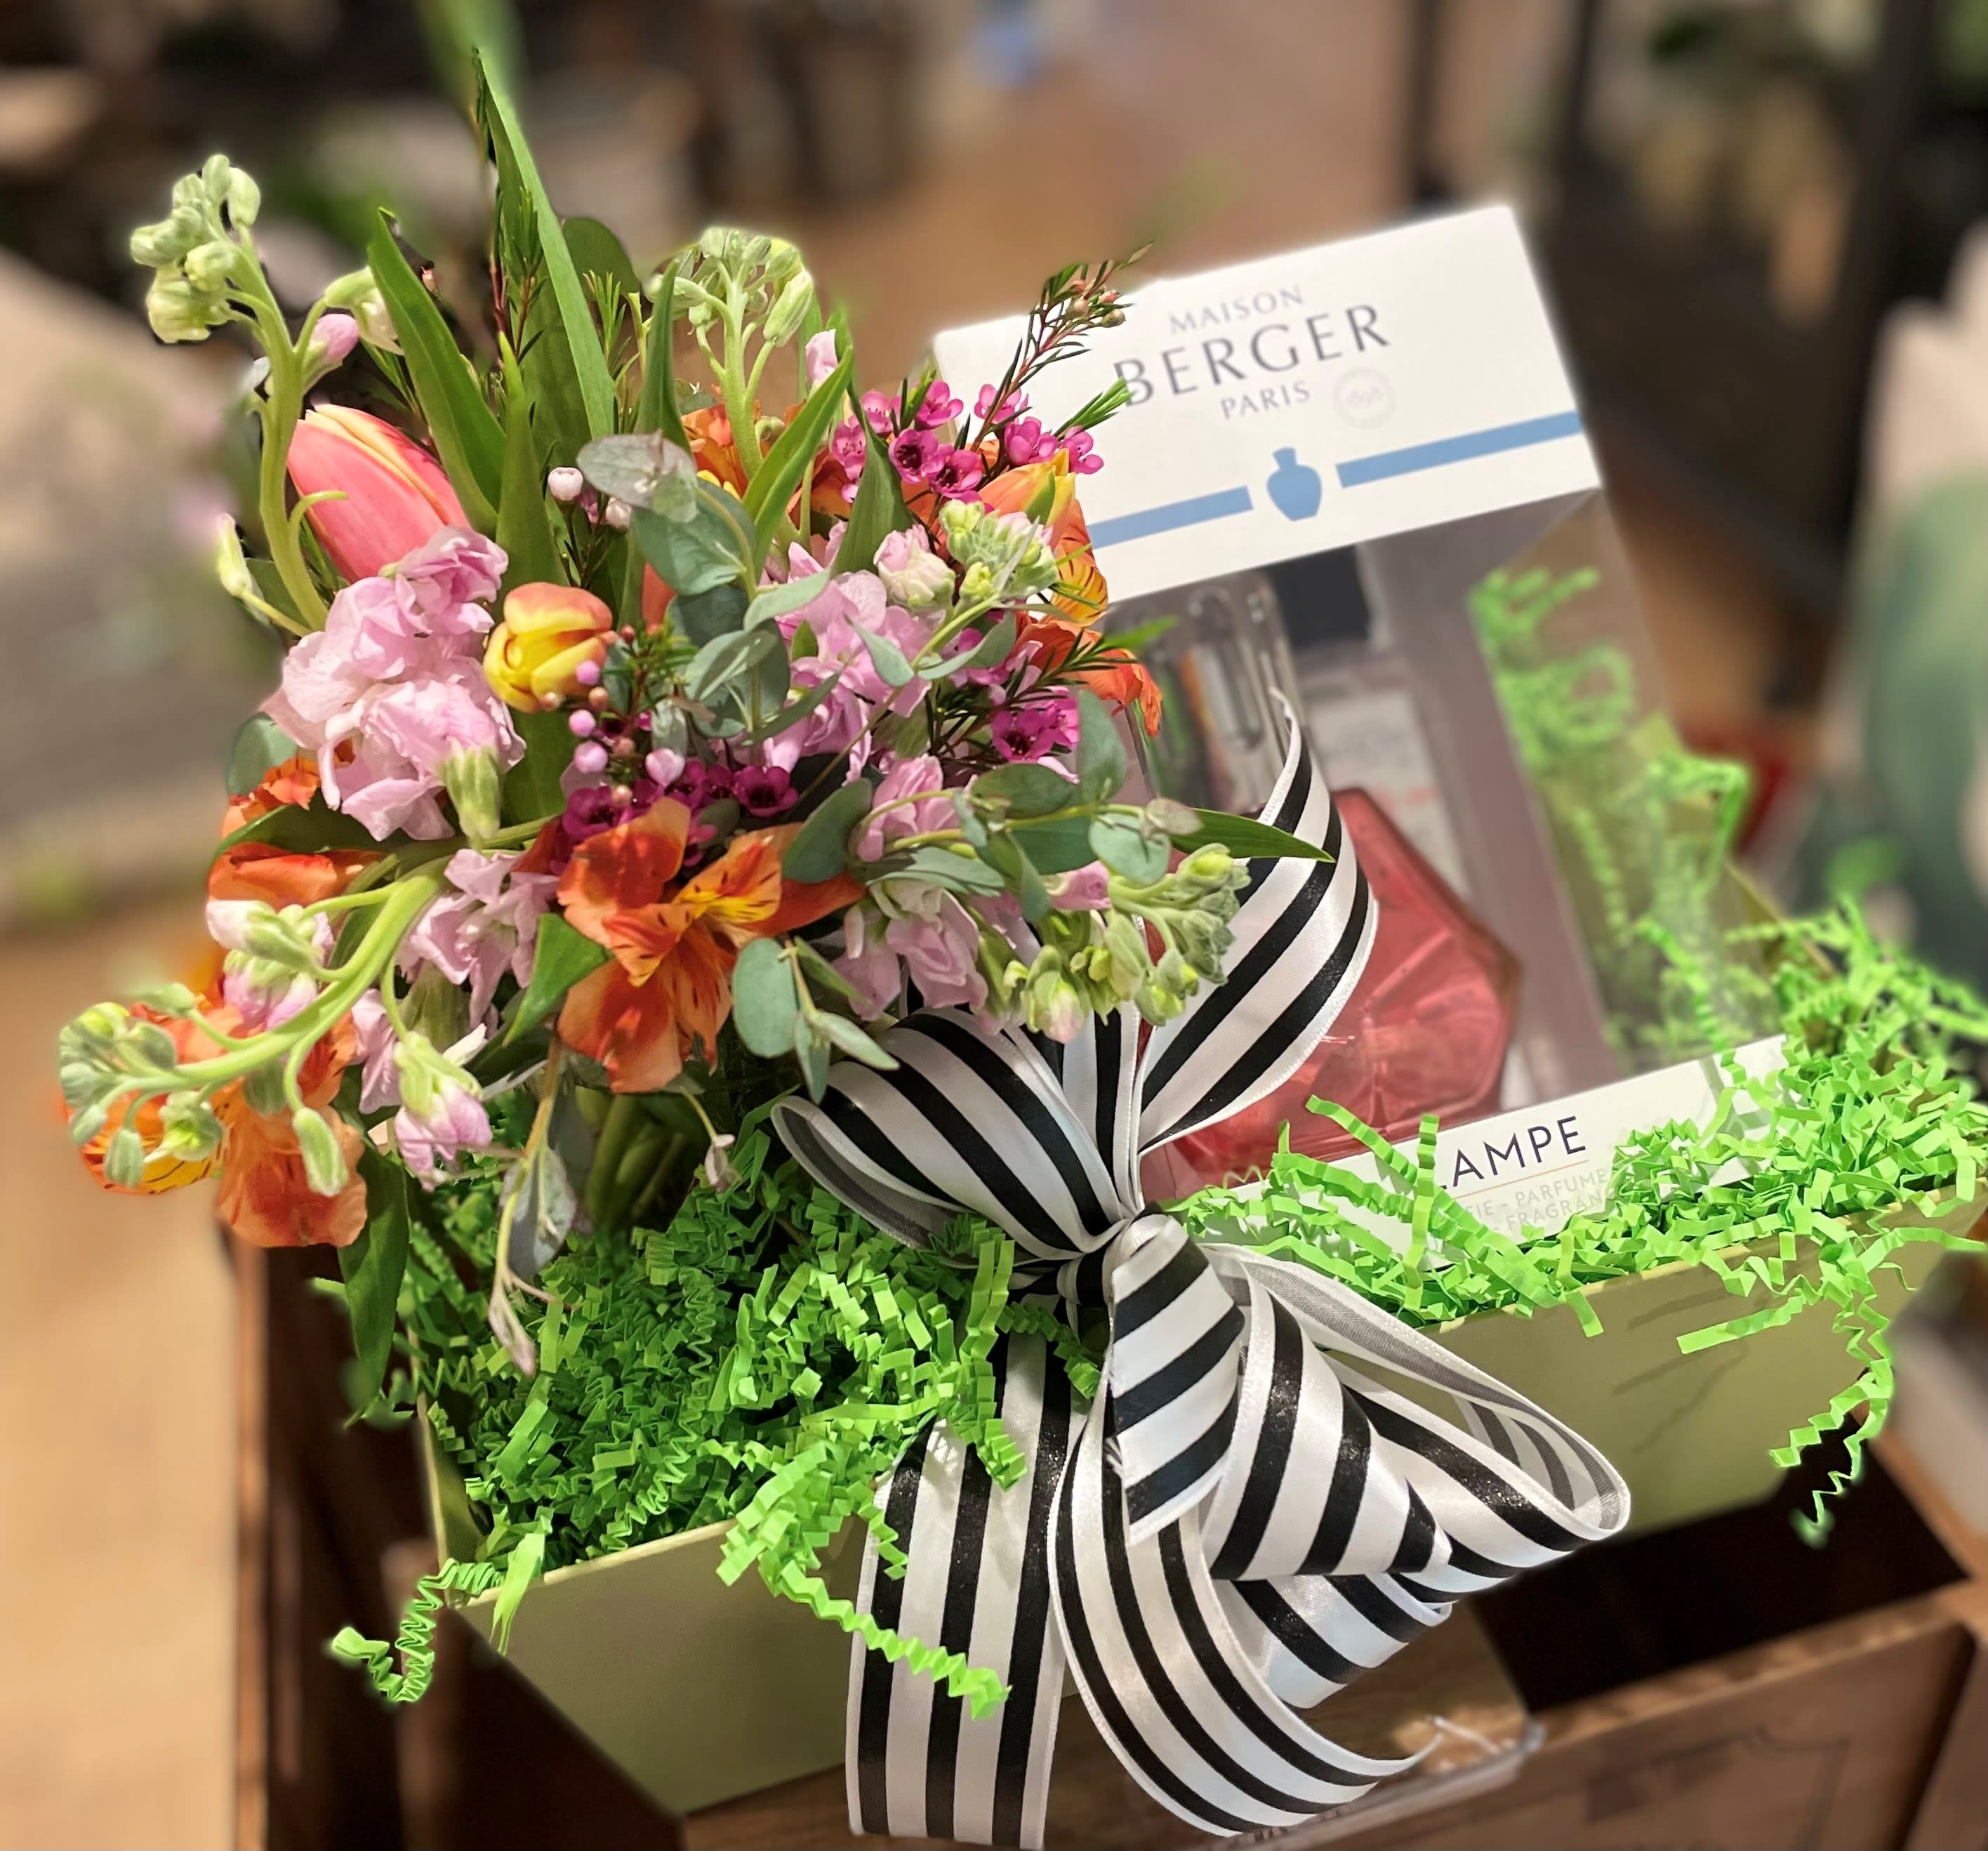 Curly Willow Flowers and Maison Berger Box in Joplin, MO